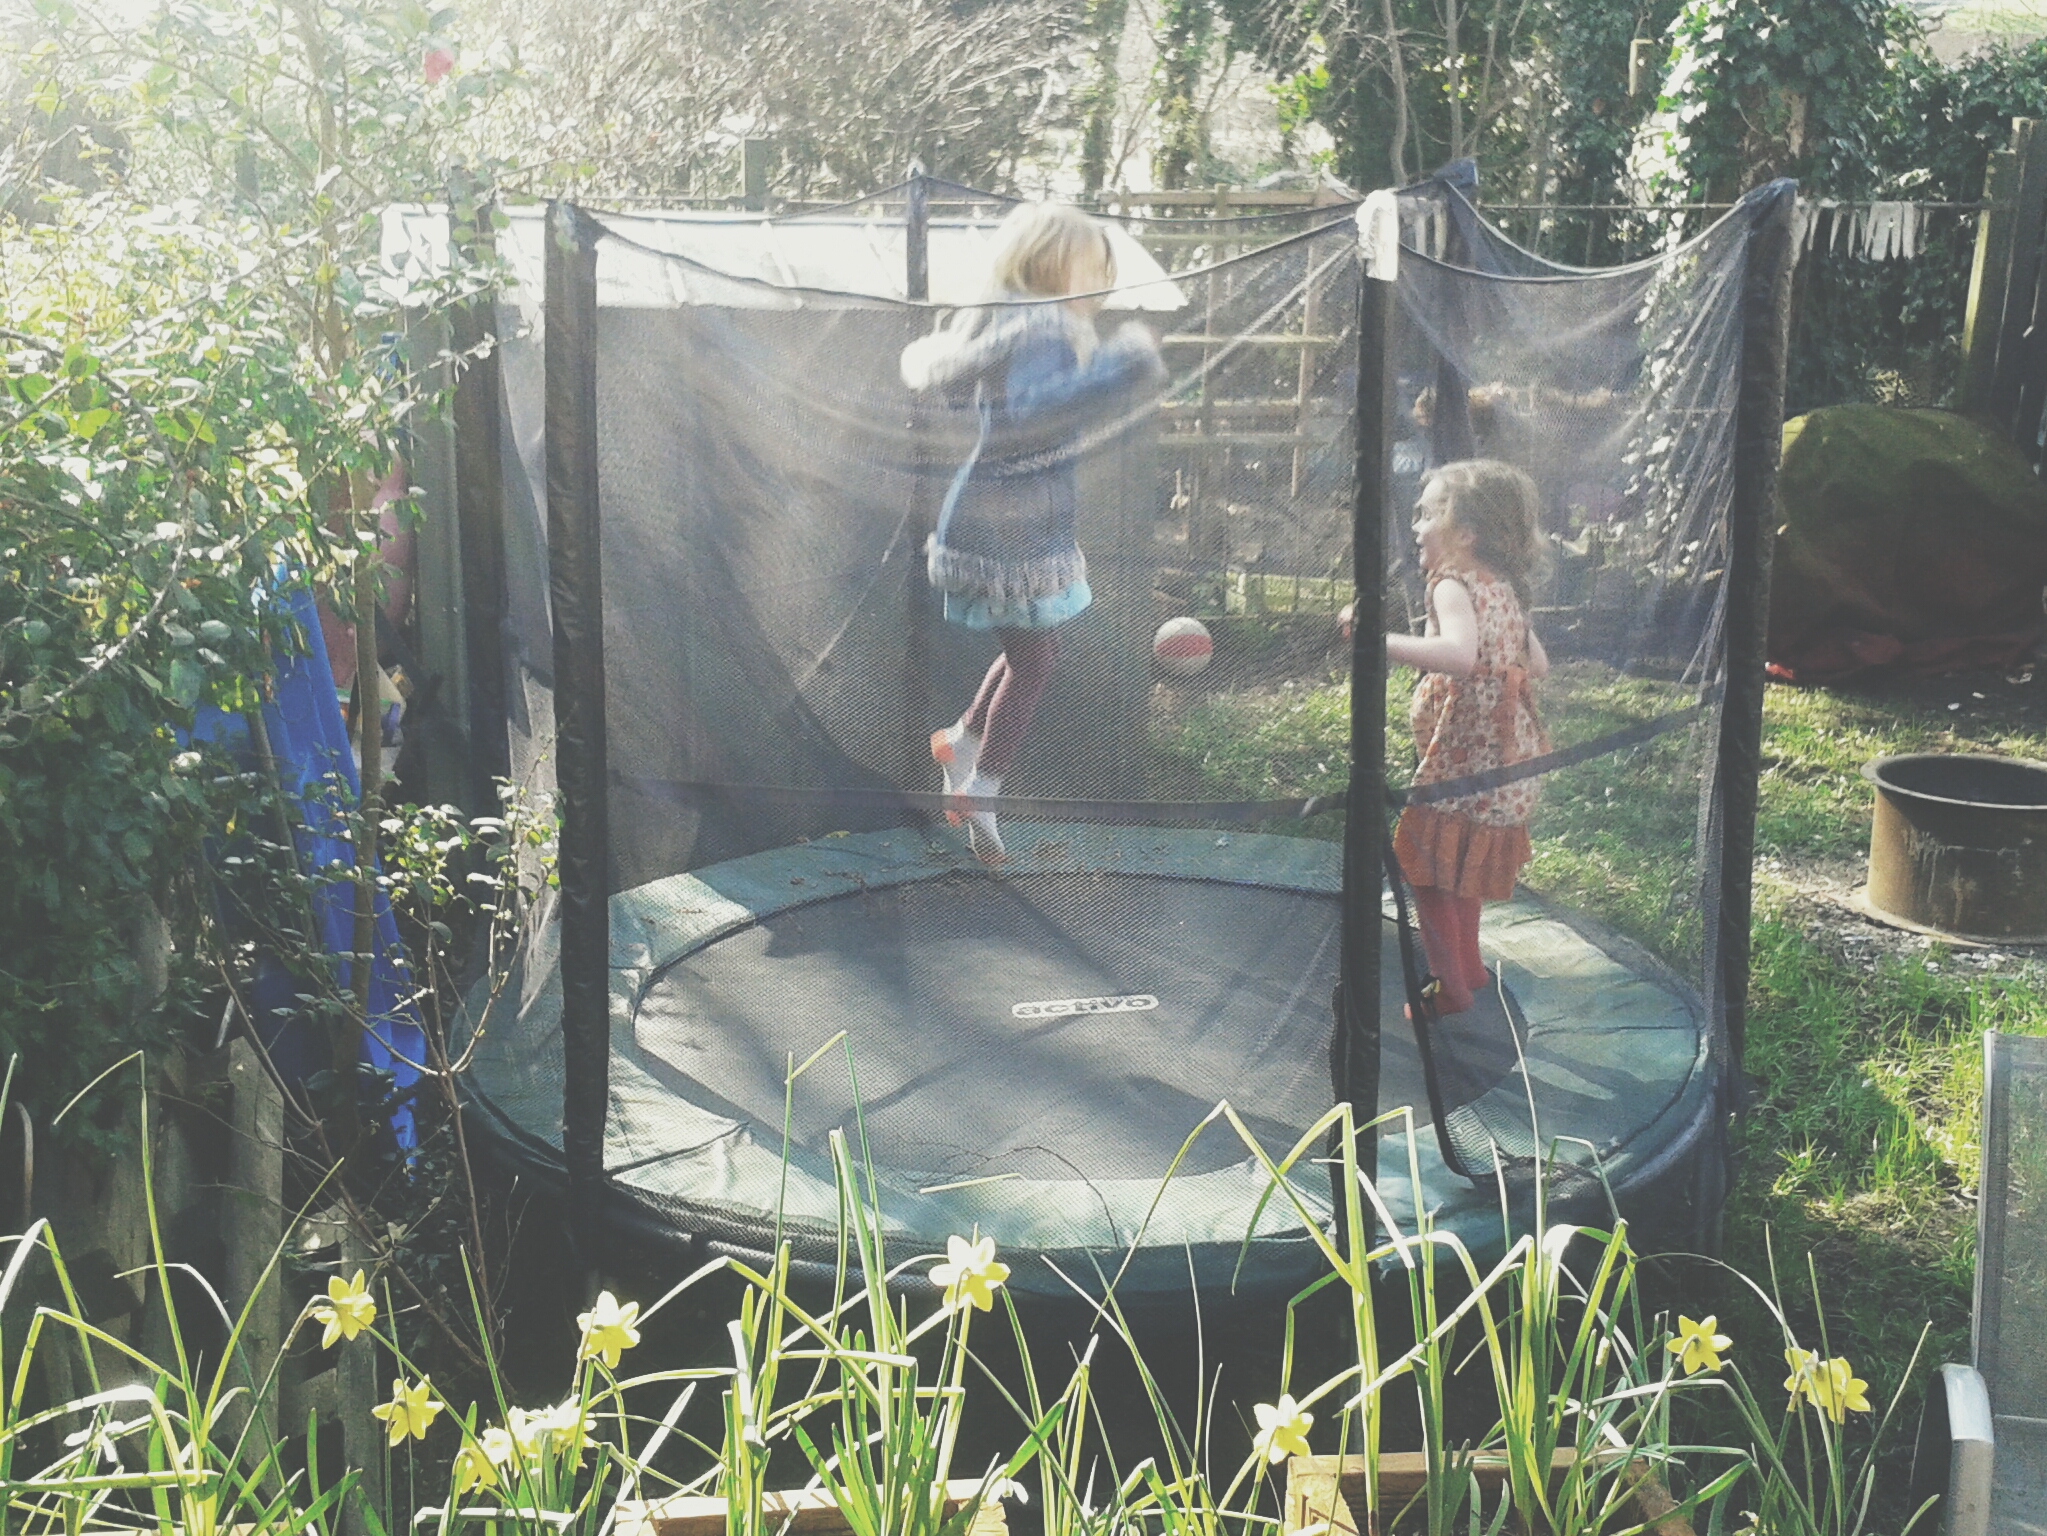 trampoling in the sunshine